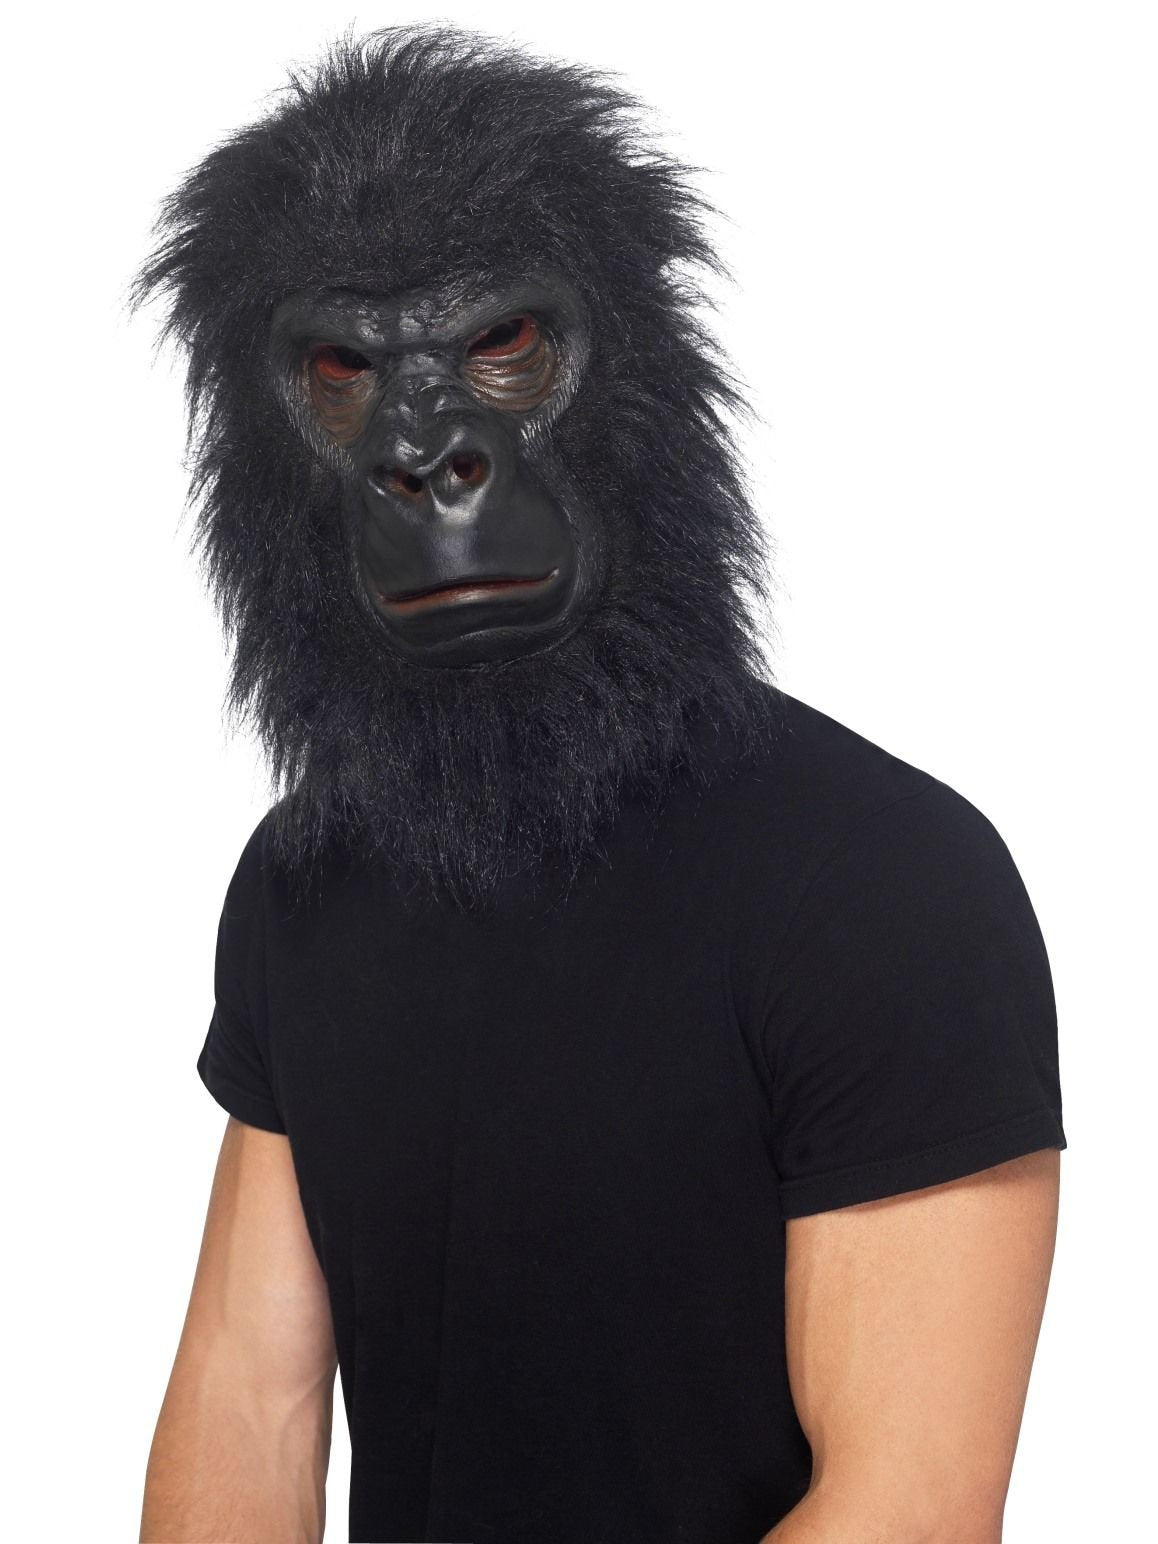 Mask Gorilla Hairy Scary Deluxe